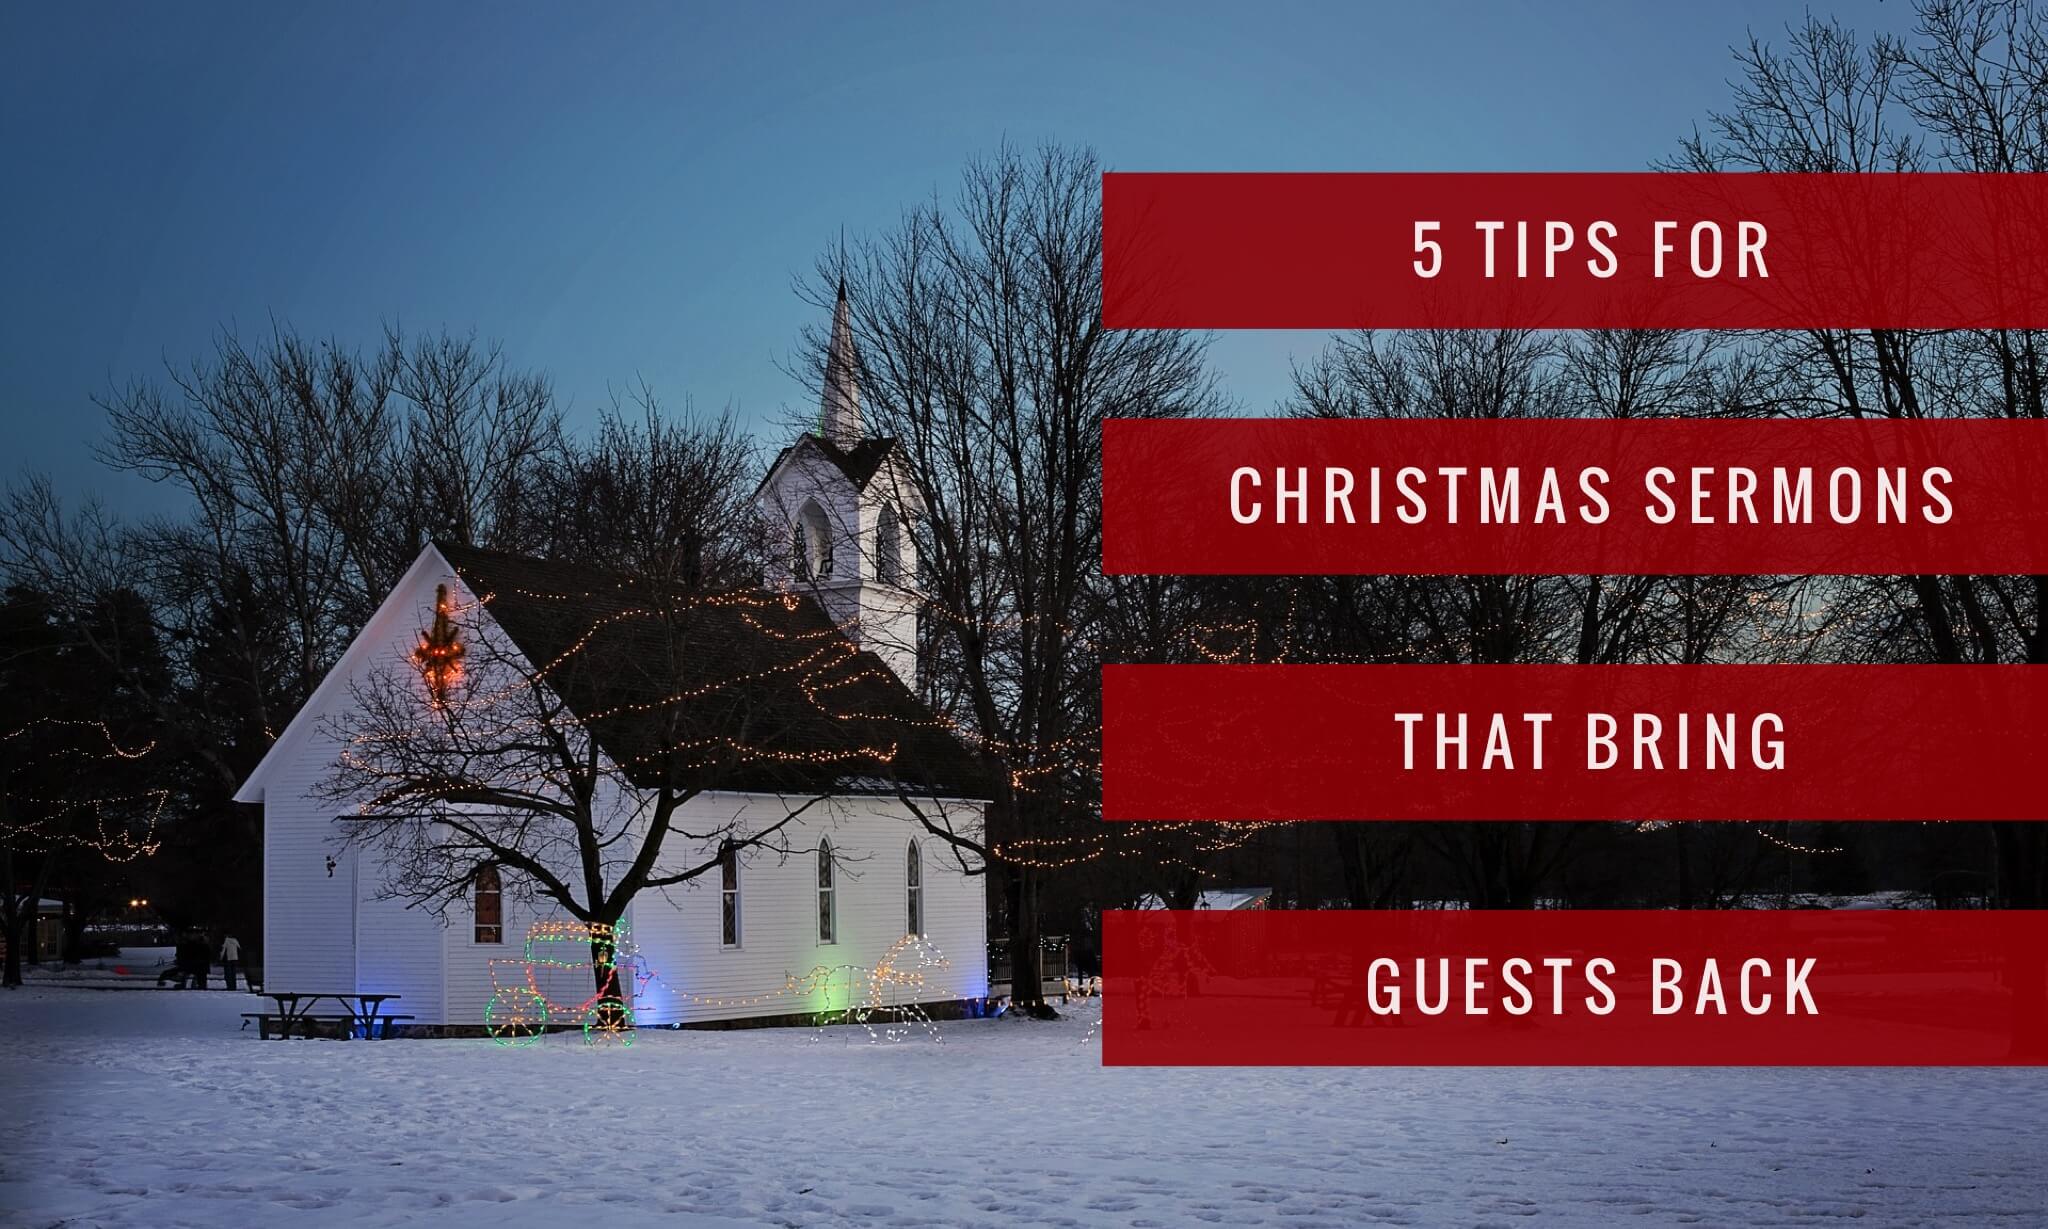 Christmas sermons that bring guests back